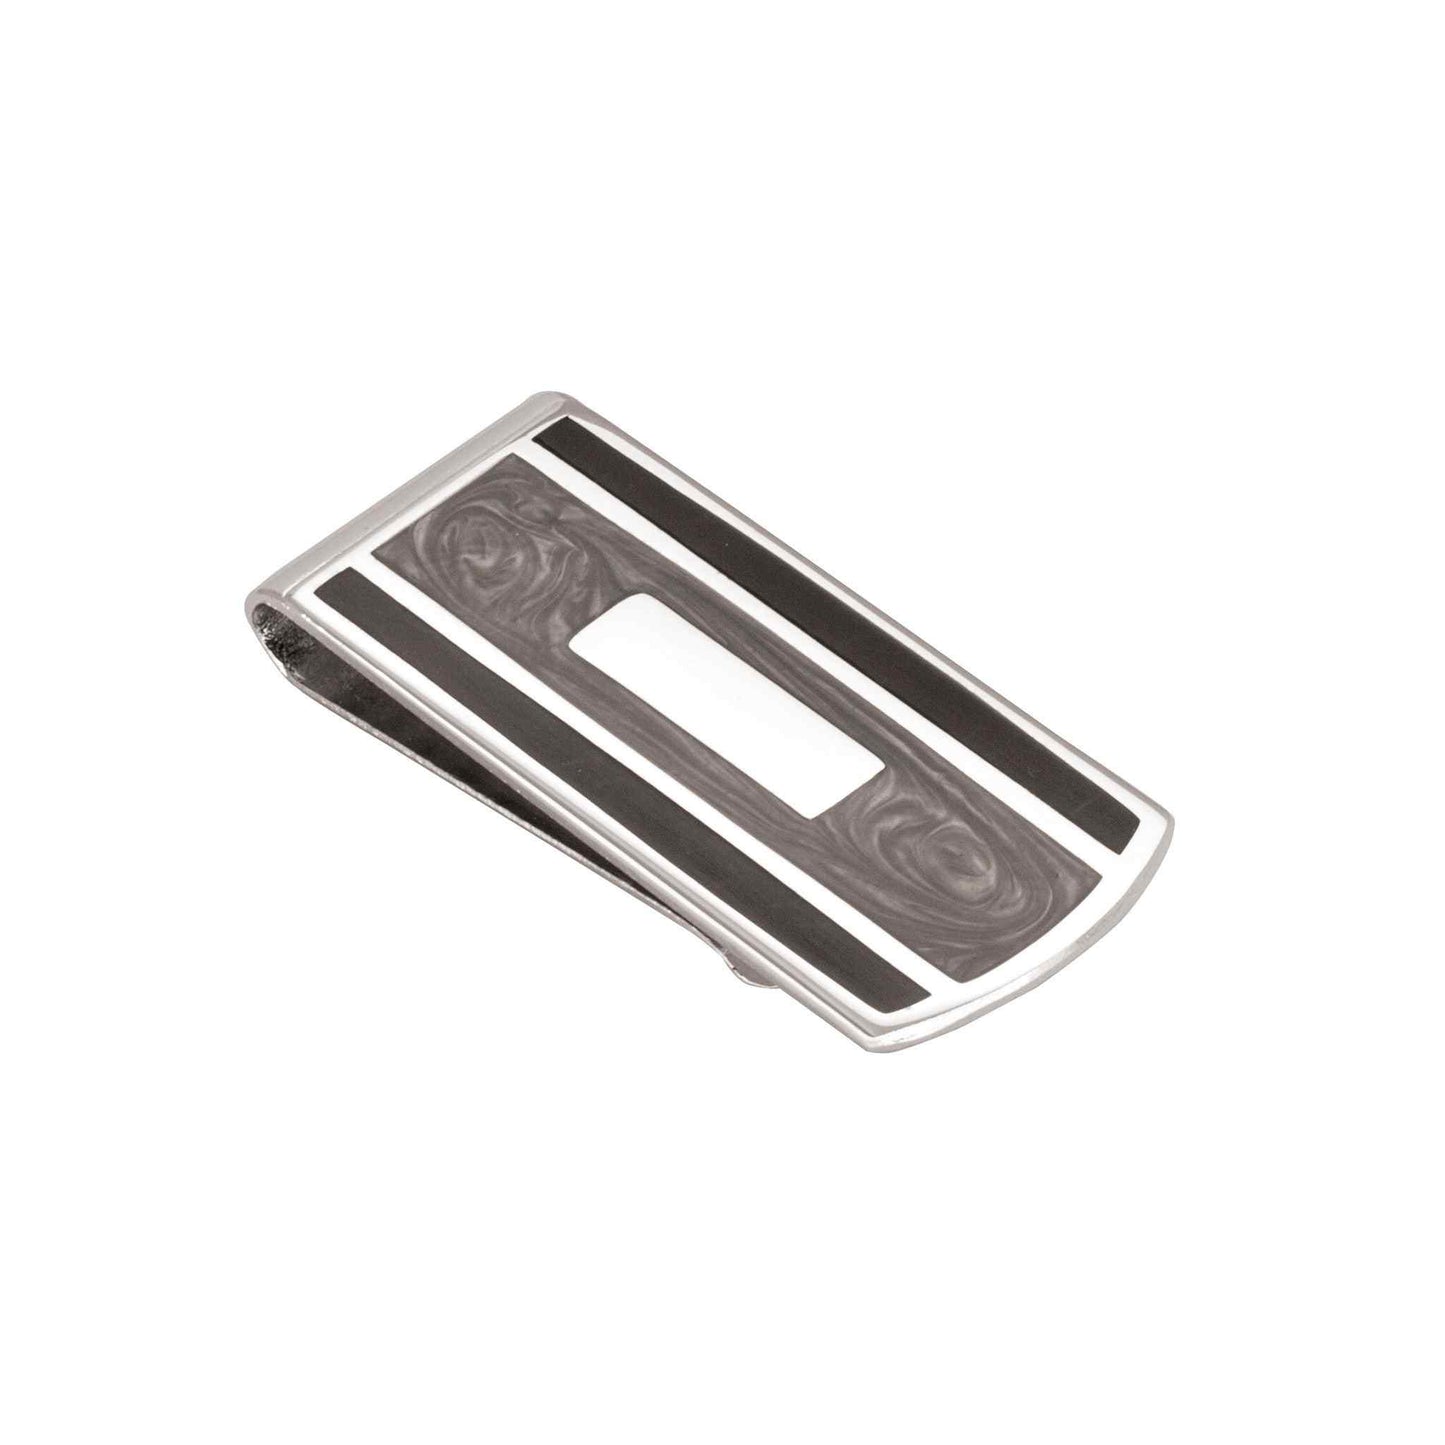 A black and grey epoxy money clip displayed on a neutral white background.